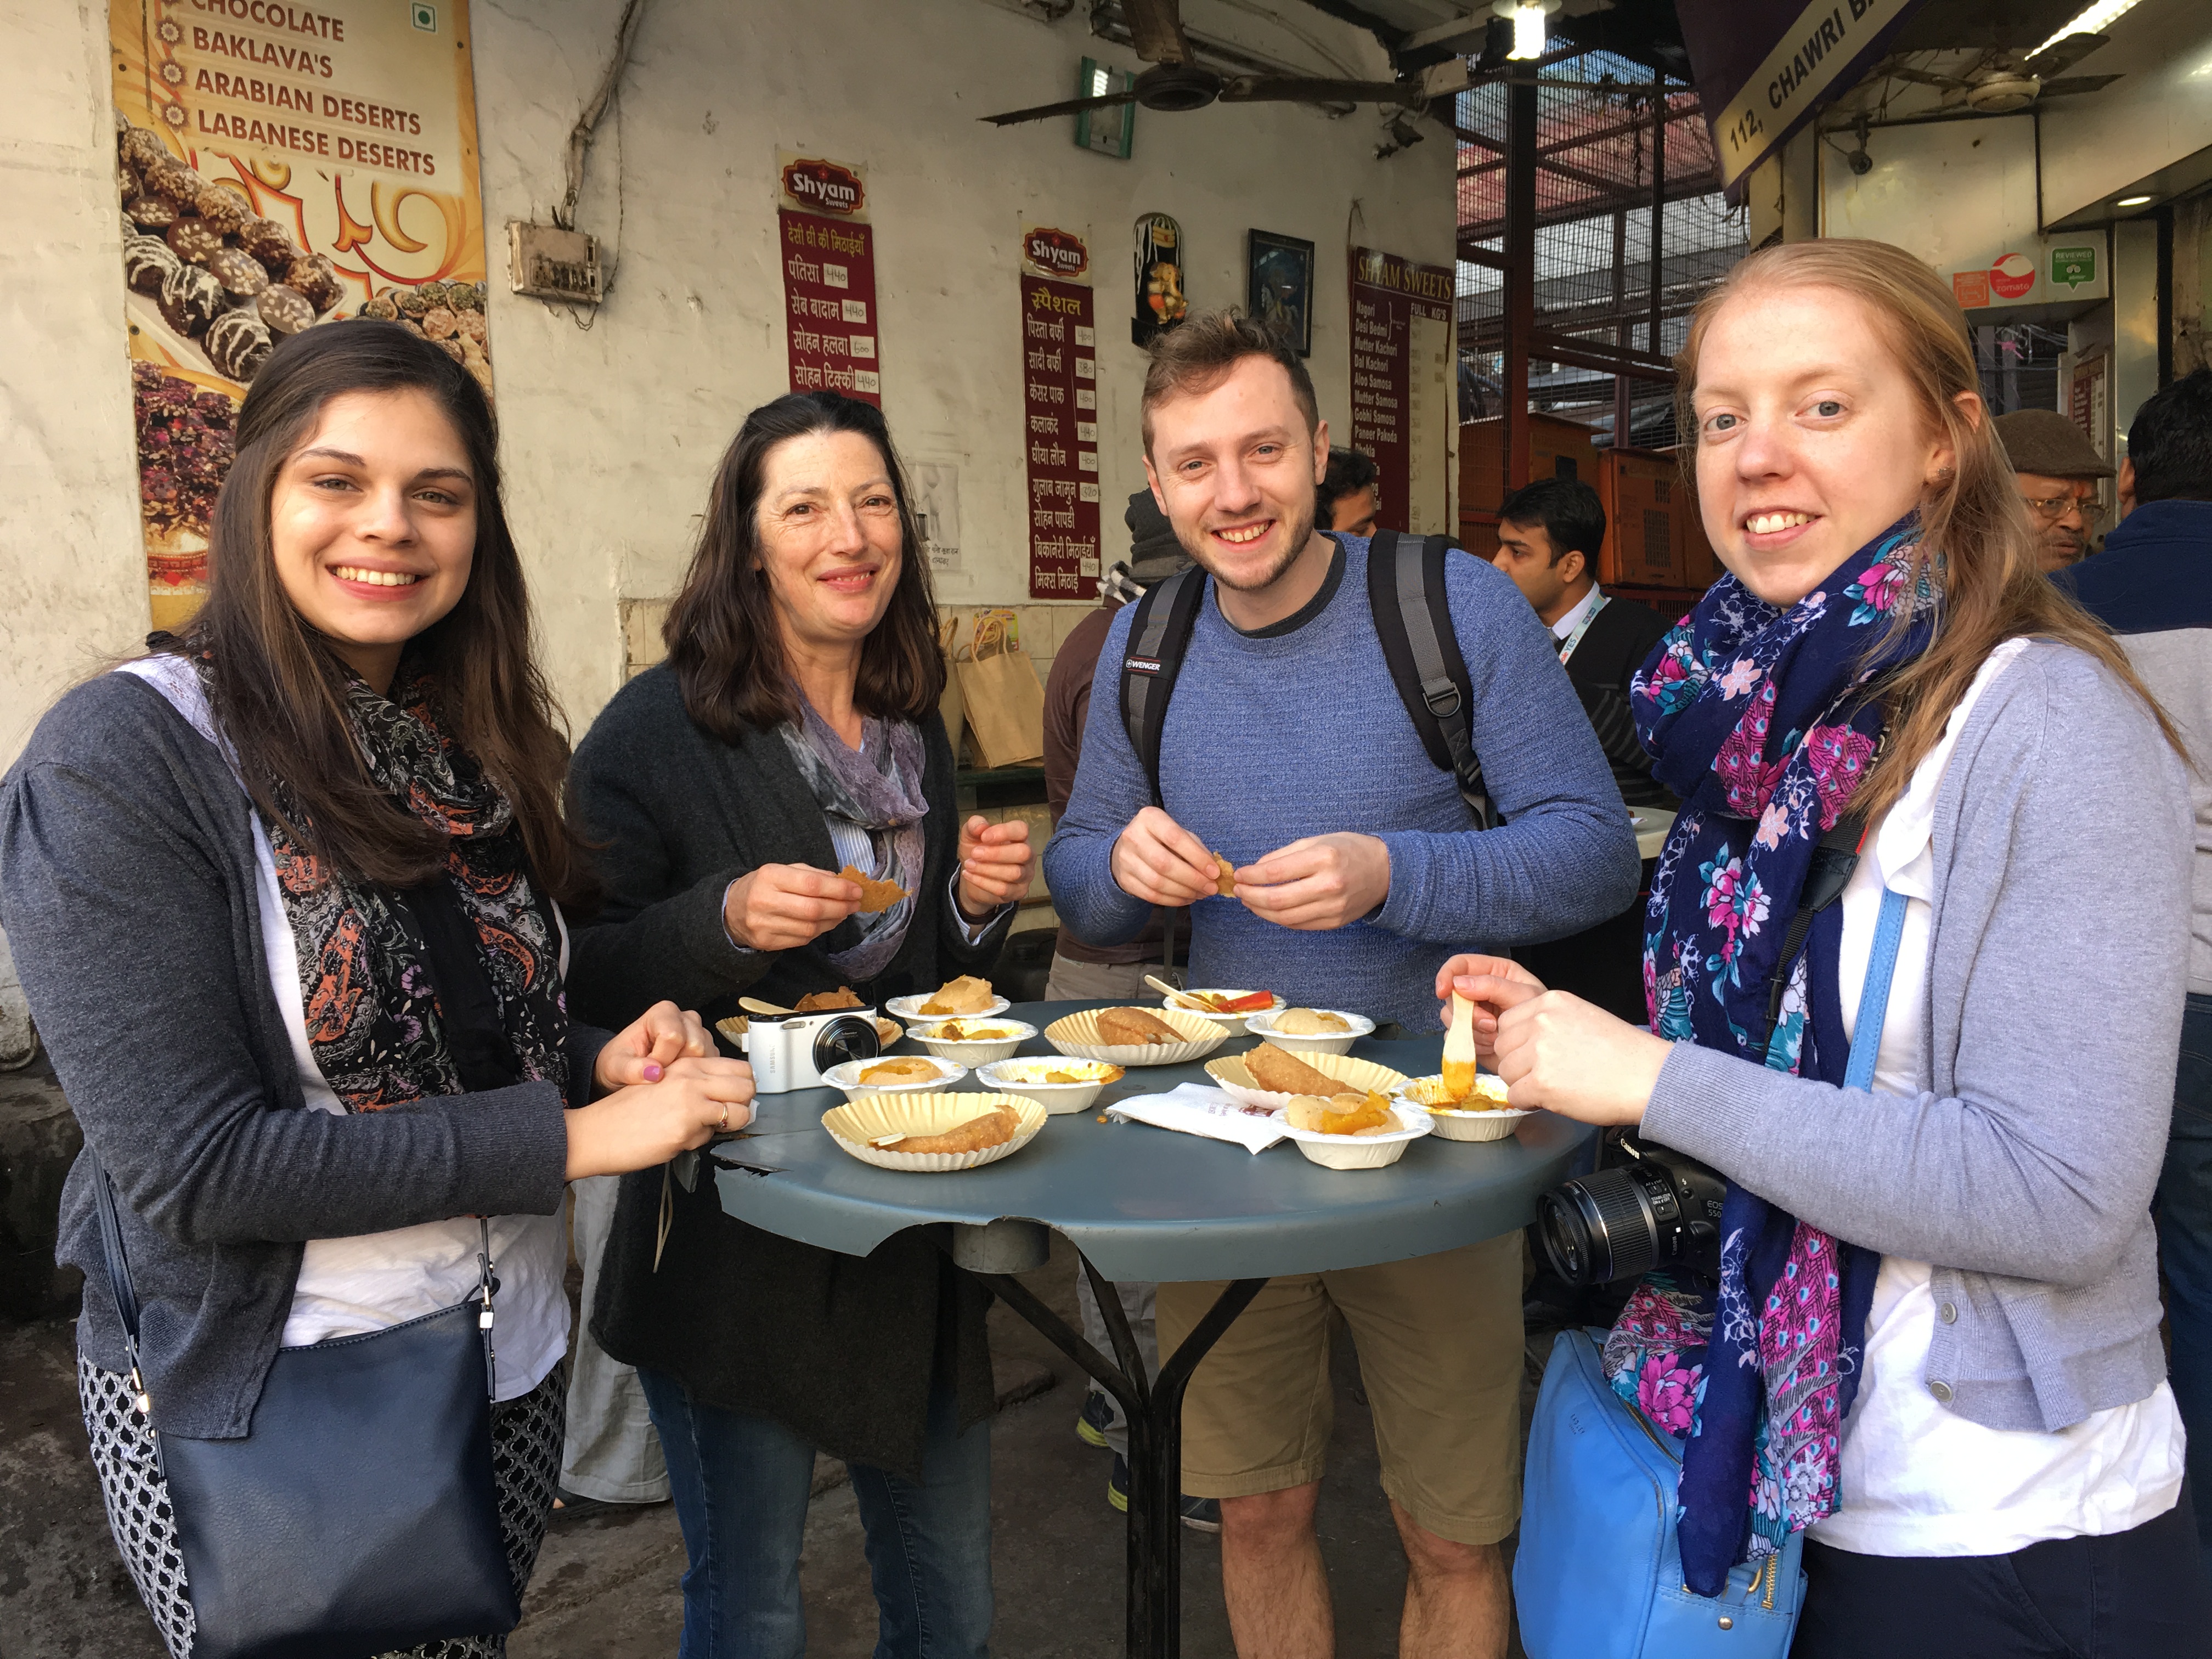 Delhi Food Walks - Street food tours and Sightseeing in Old Delhi, India